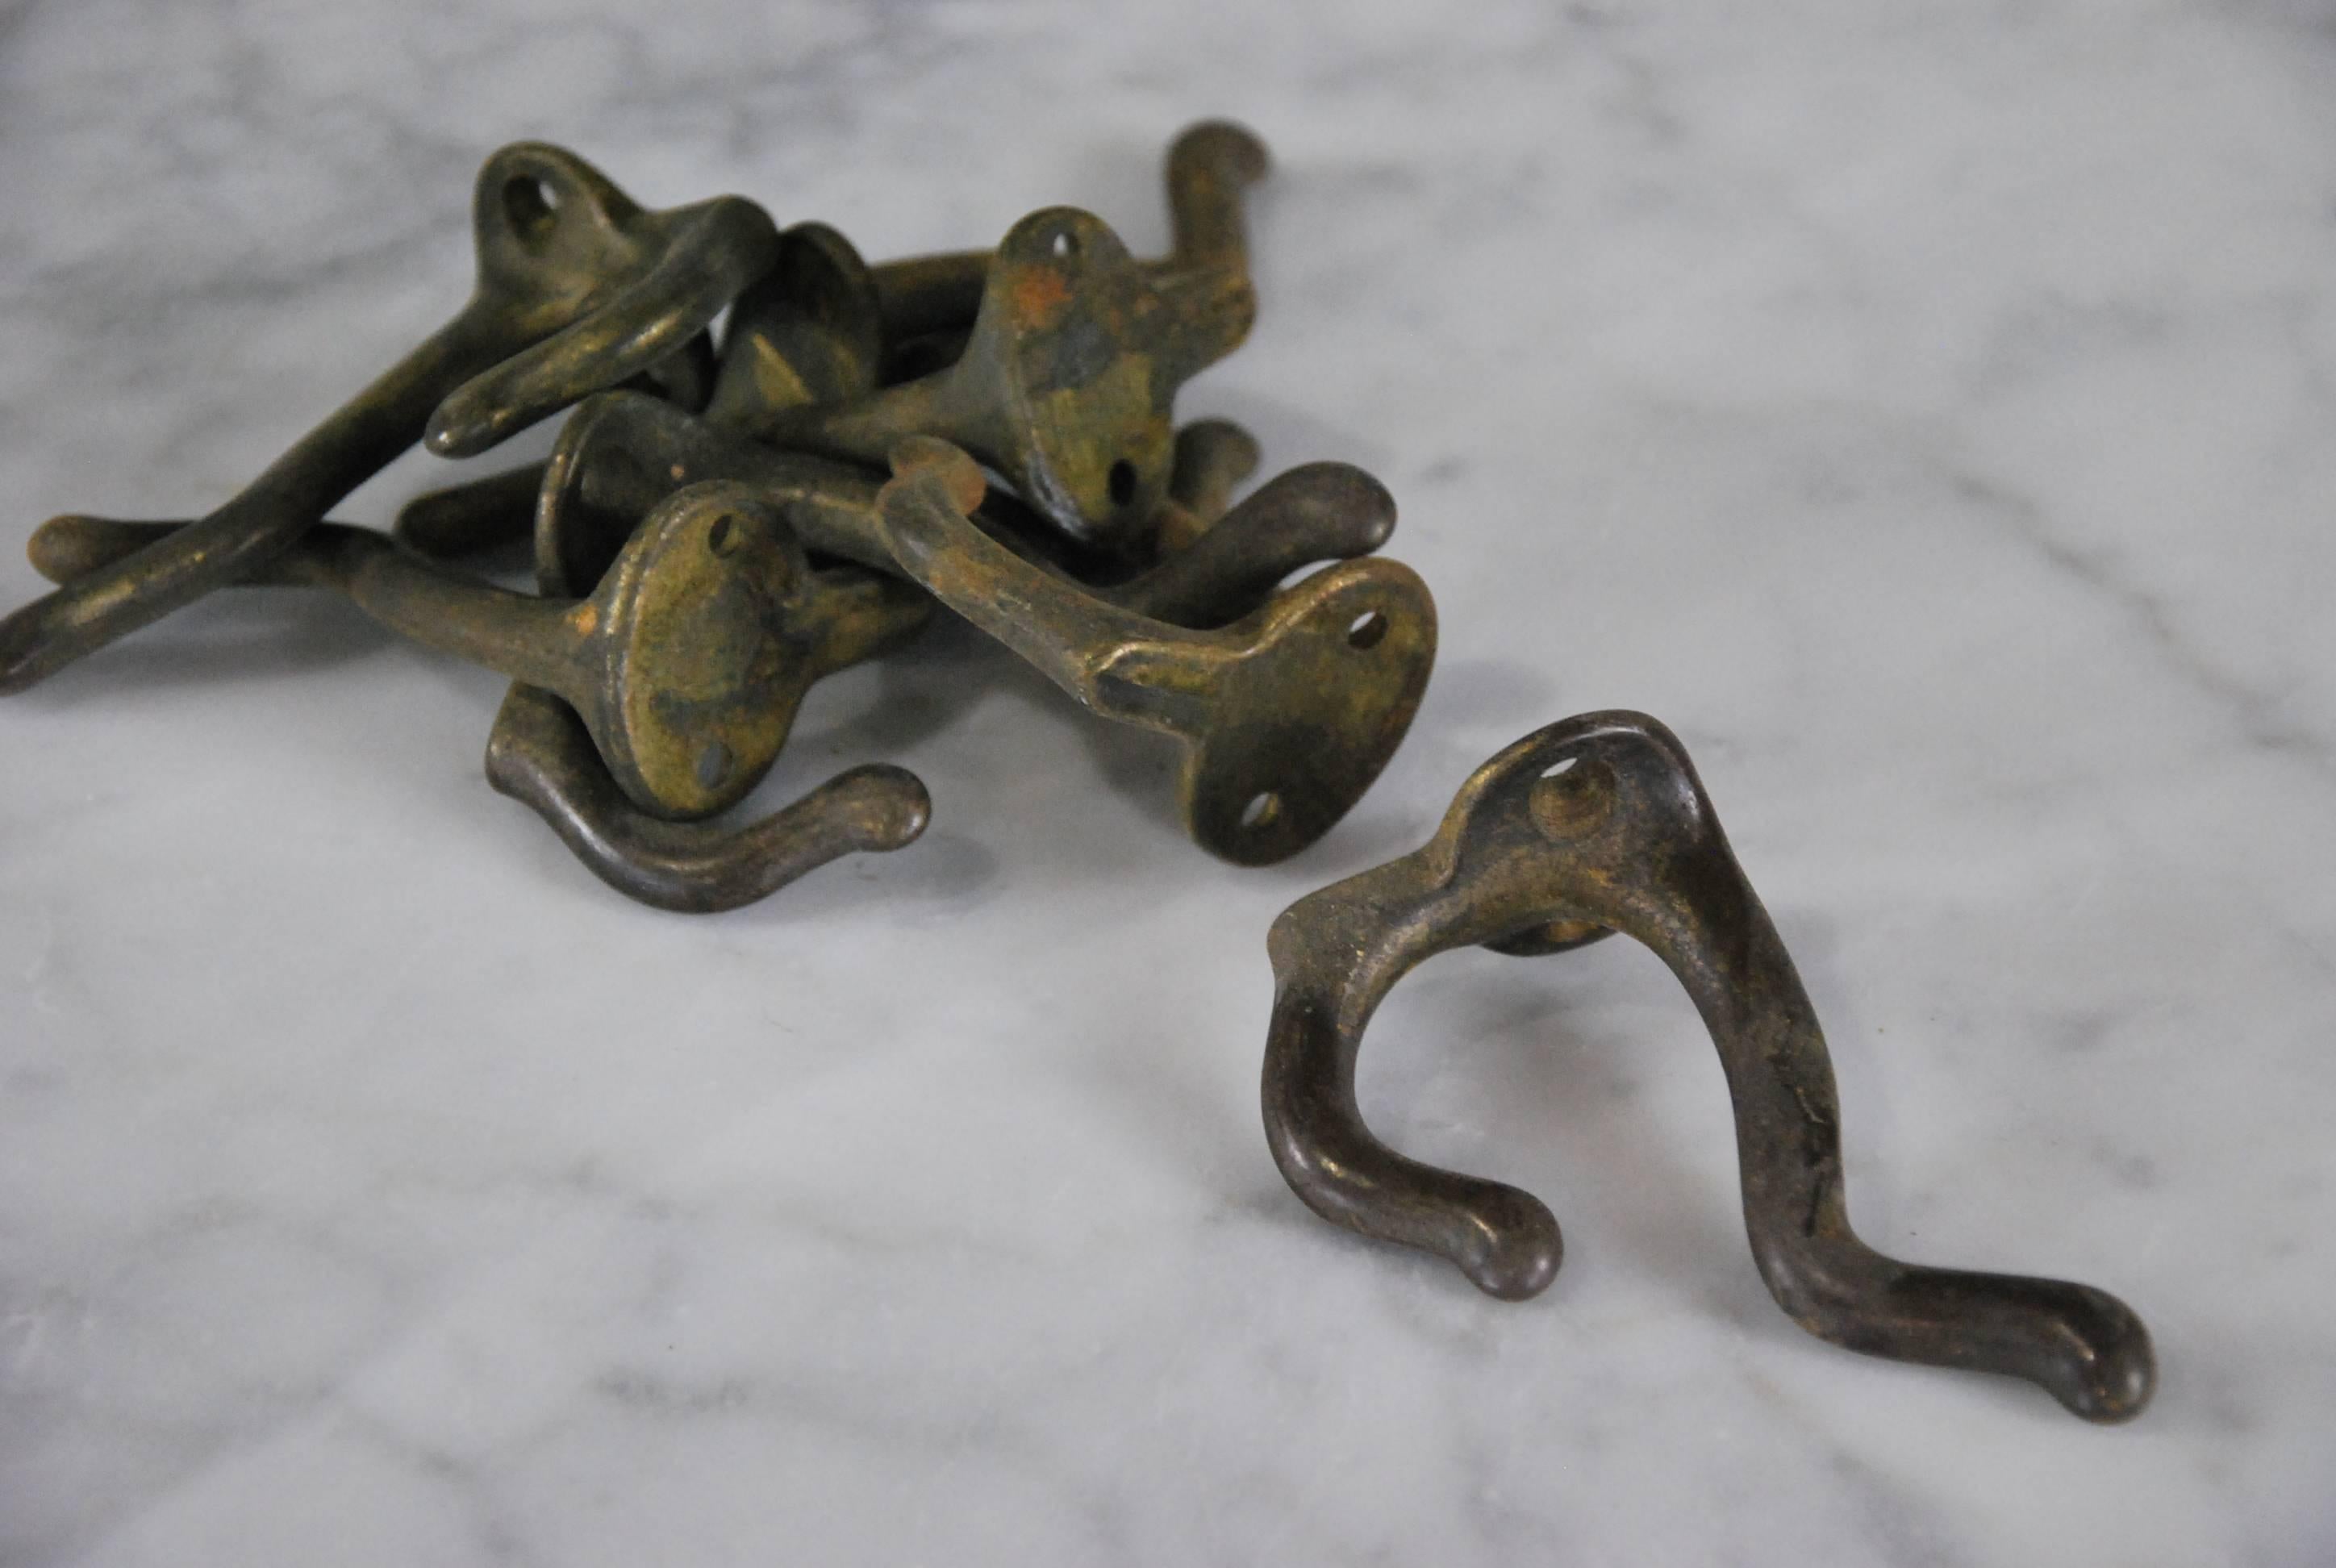 We have a quantity of 60 iron coat hooks with a very worn brass coating.
Salvaged from an old school in upper New York state.